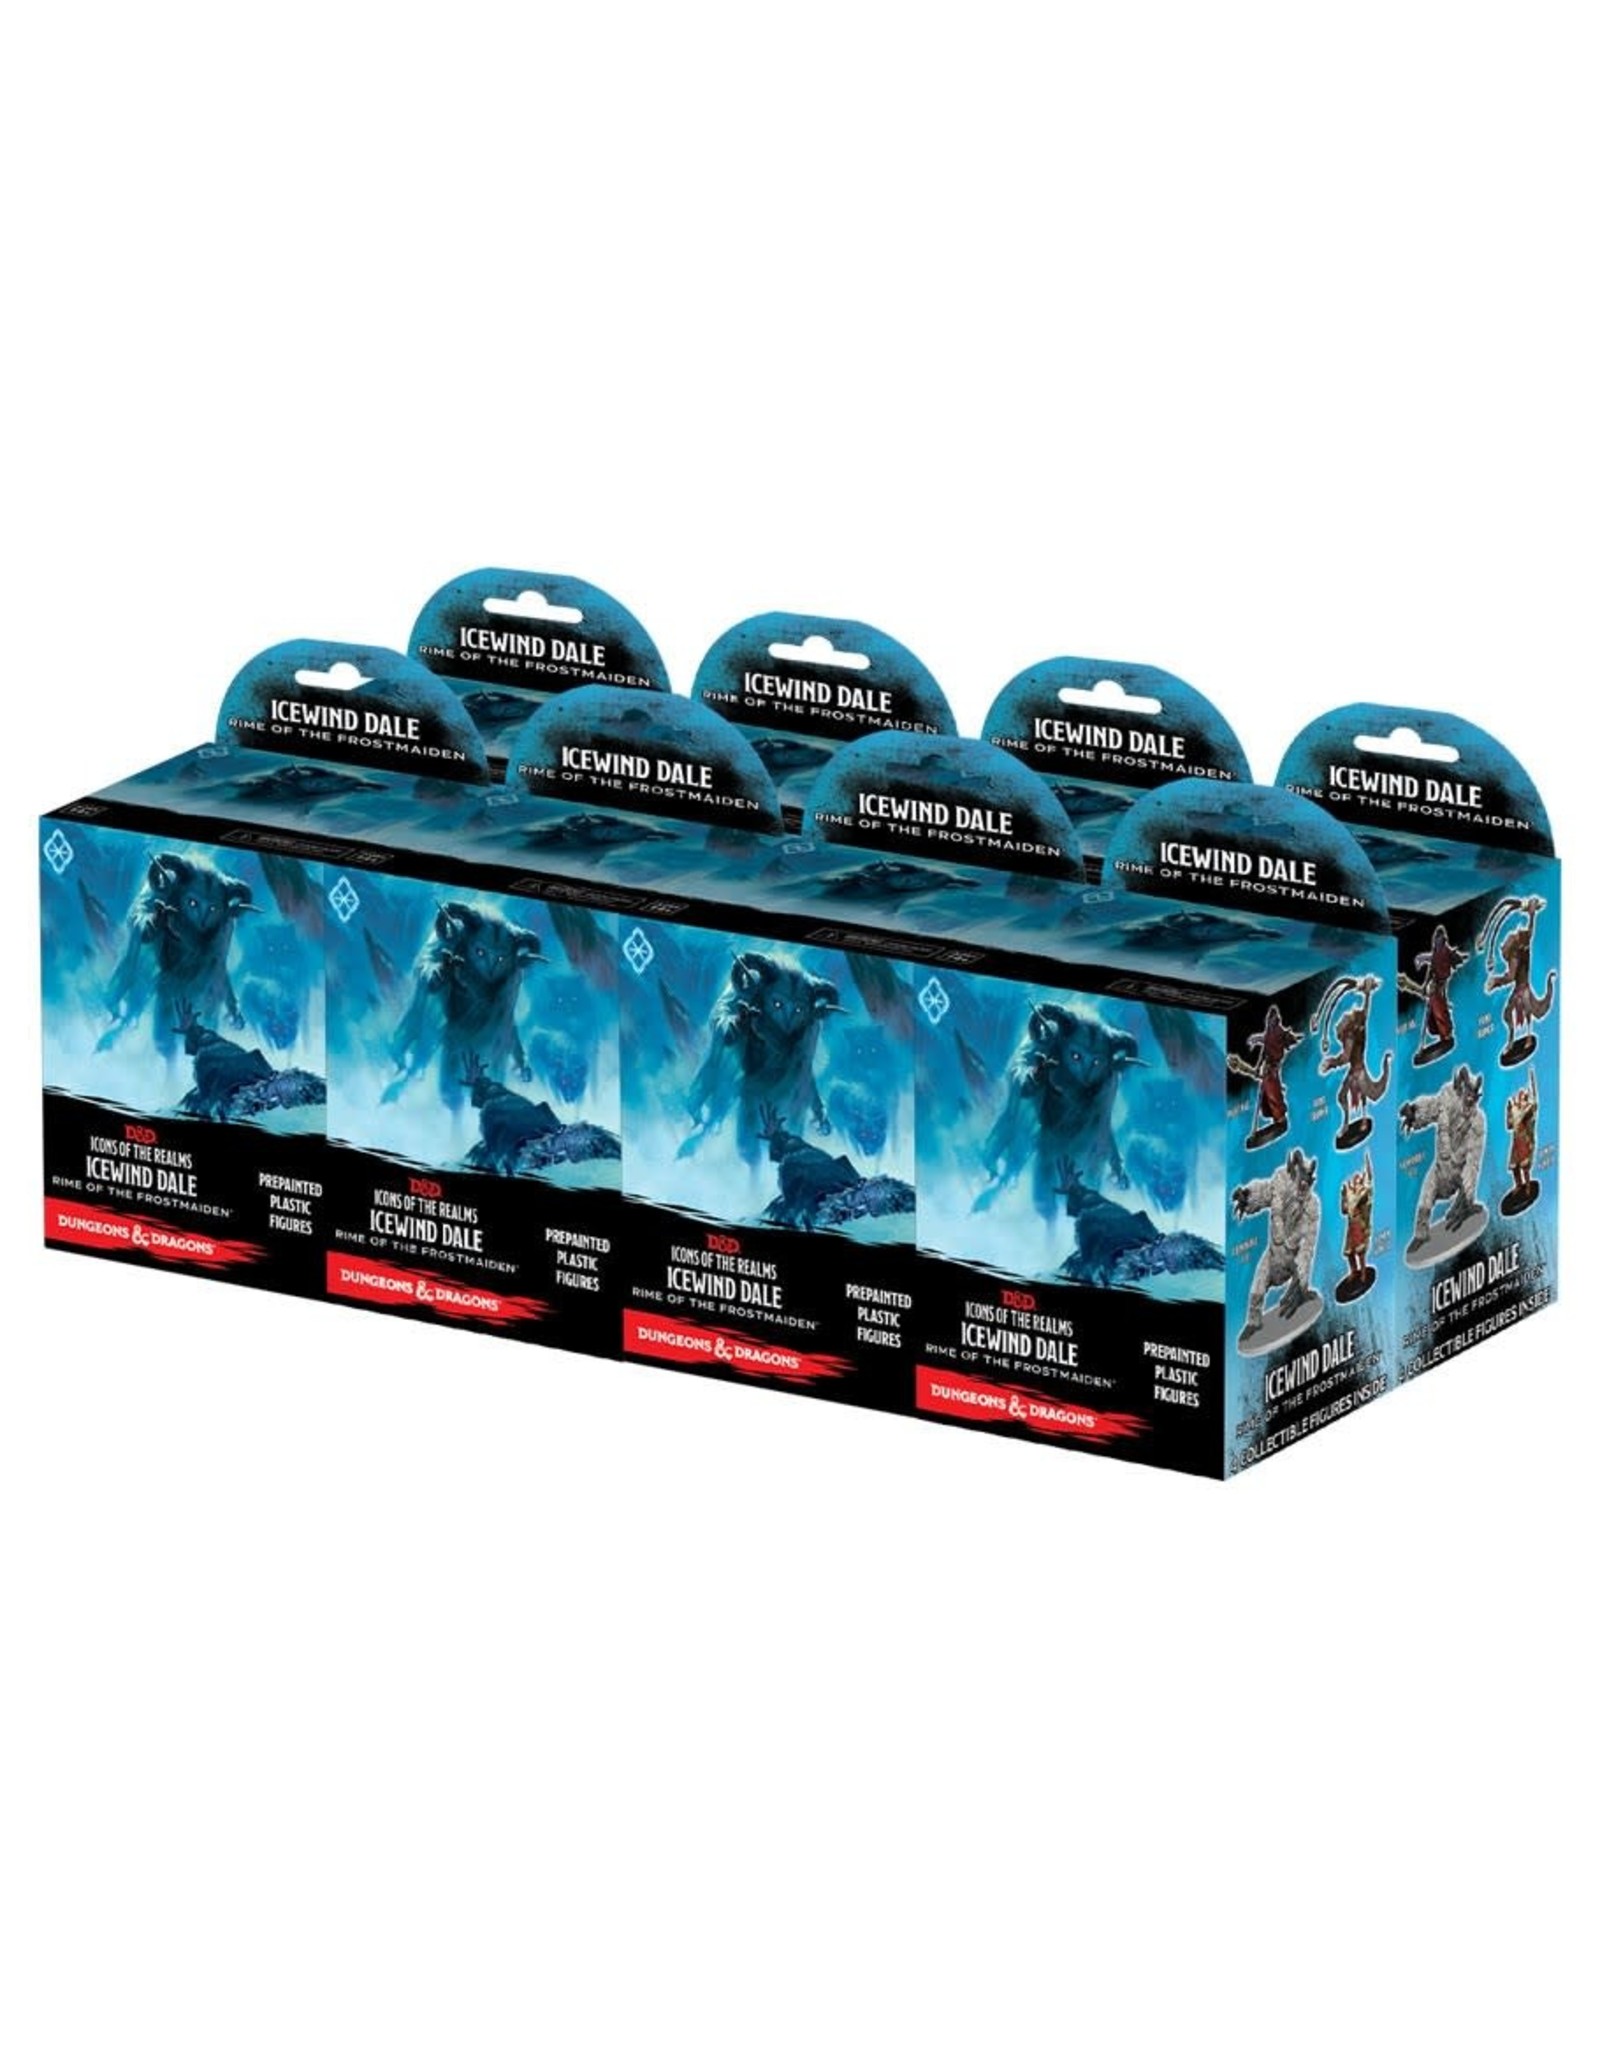 Wizkids D&D Minis: Icons of the Realms Set 17 Icewind Dale Rime of the Frostmaiden Booster Brick